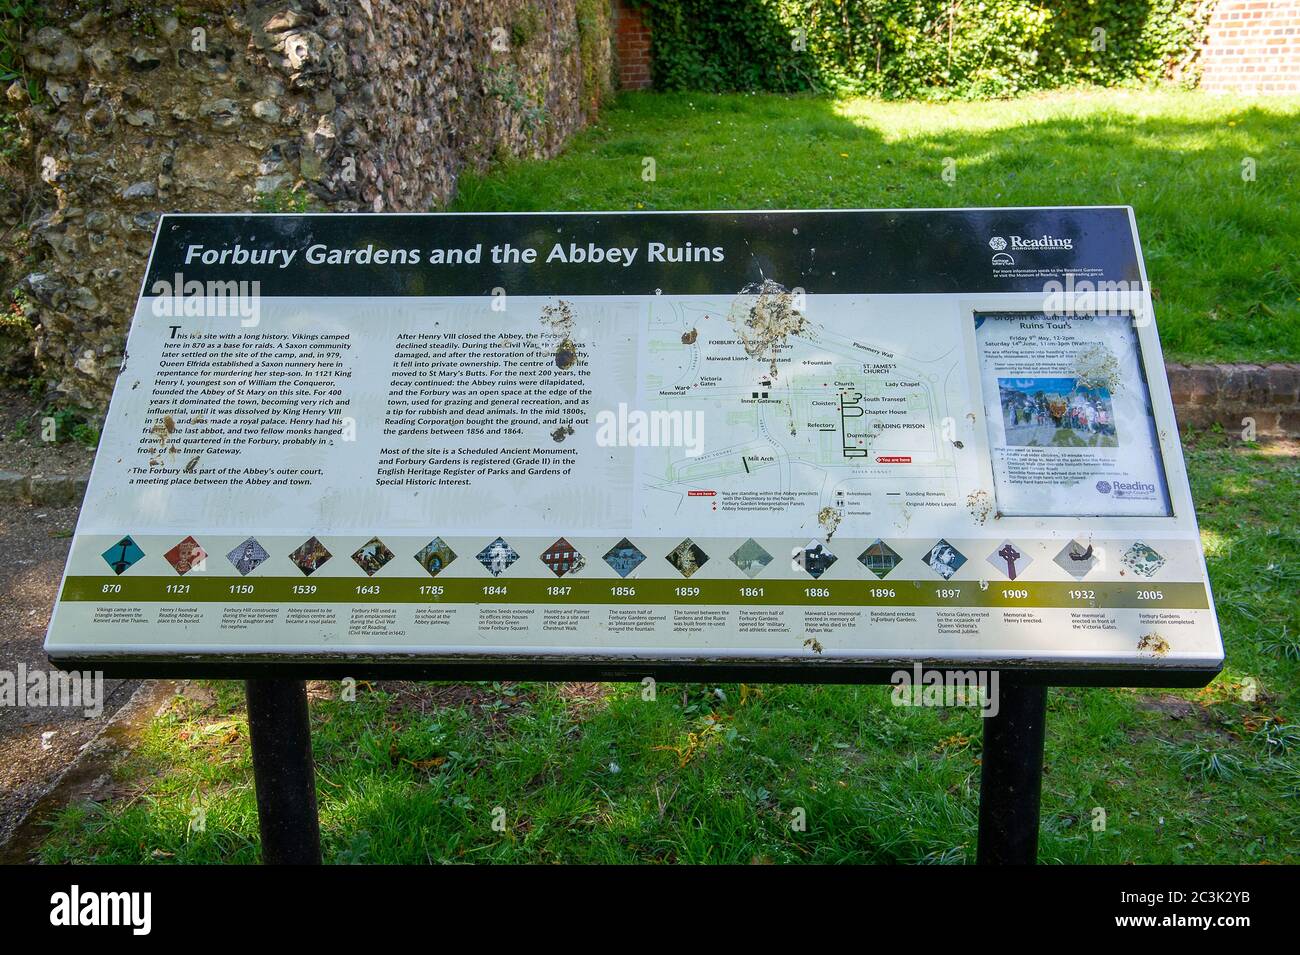 Reading, Berkshire, UK. 23rd April, 2015. A  history board about Forbury Gardens and the Abbey Ruins in Reading Town Centre, Reading, Berkshire. Credit: Maureen McLean/Alamy Stock Photo